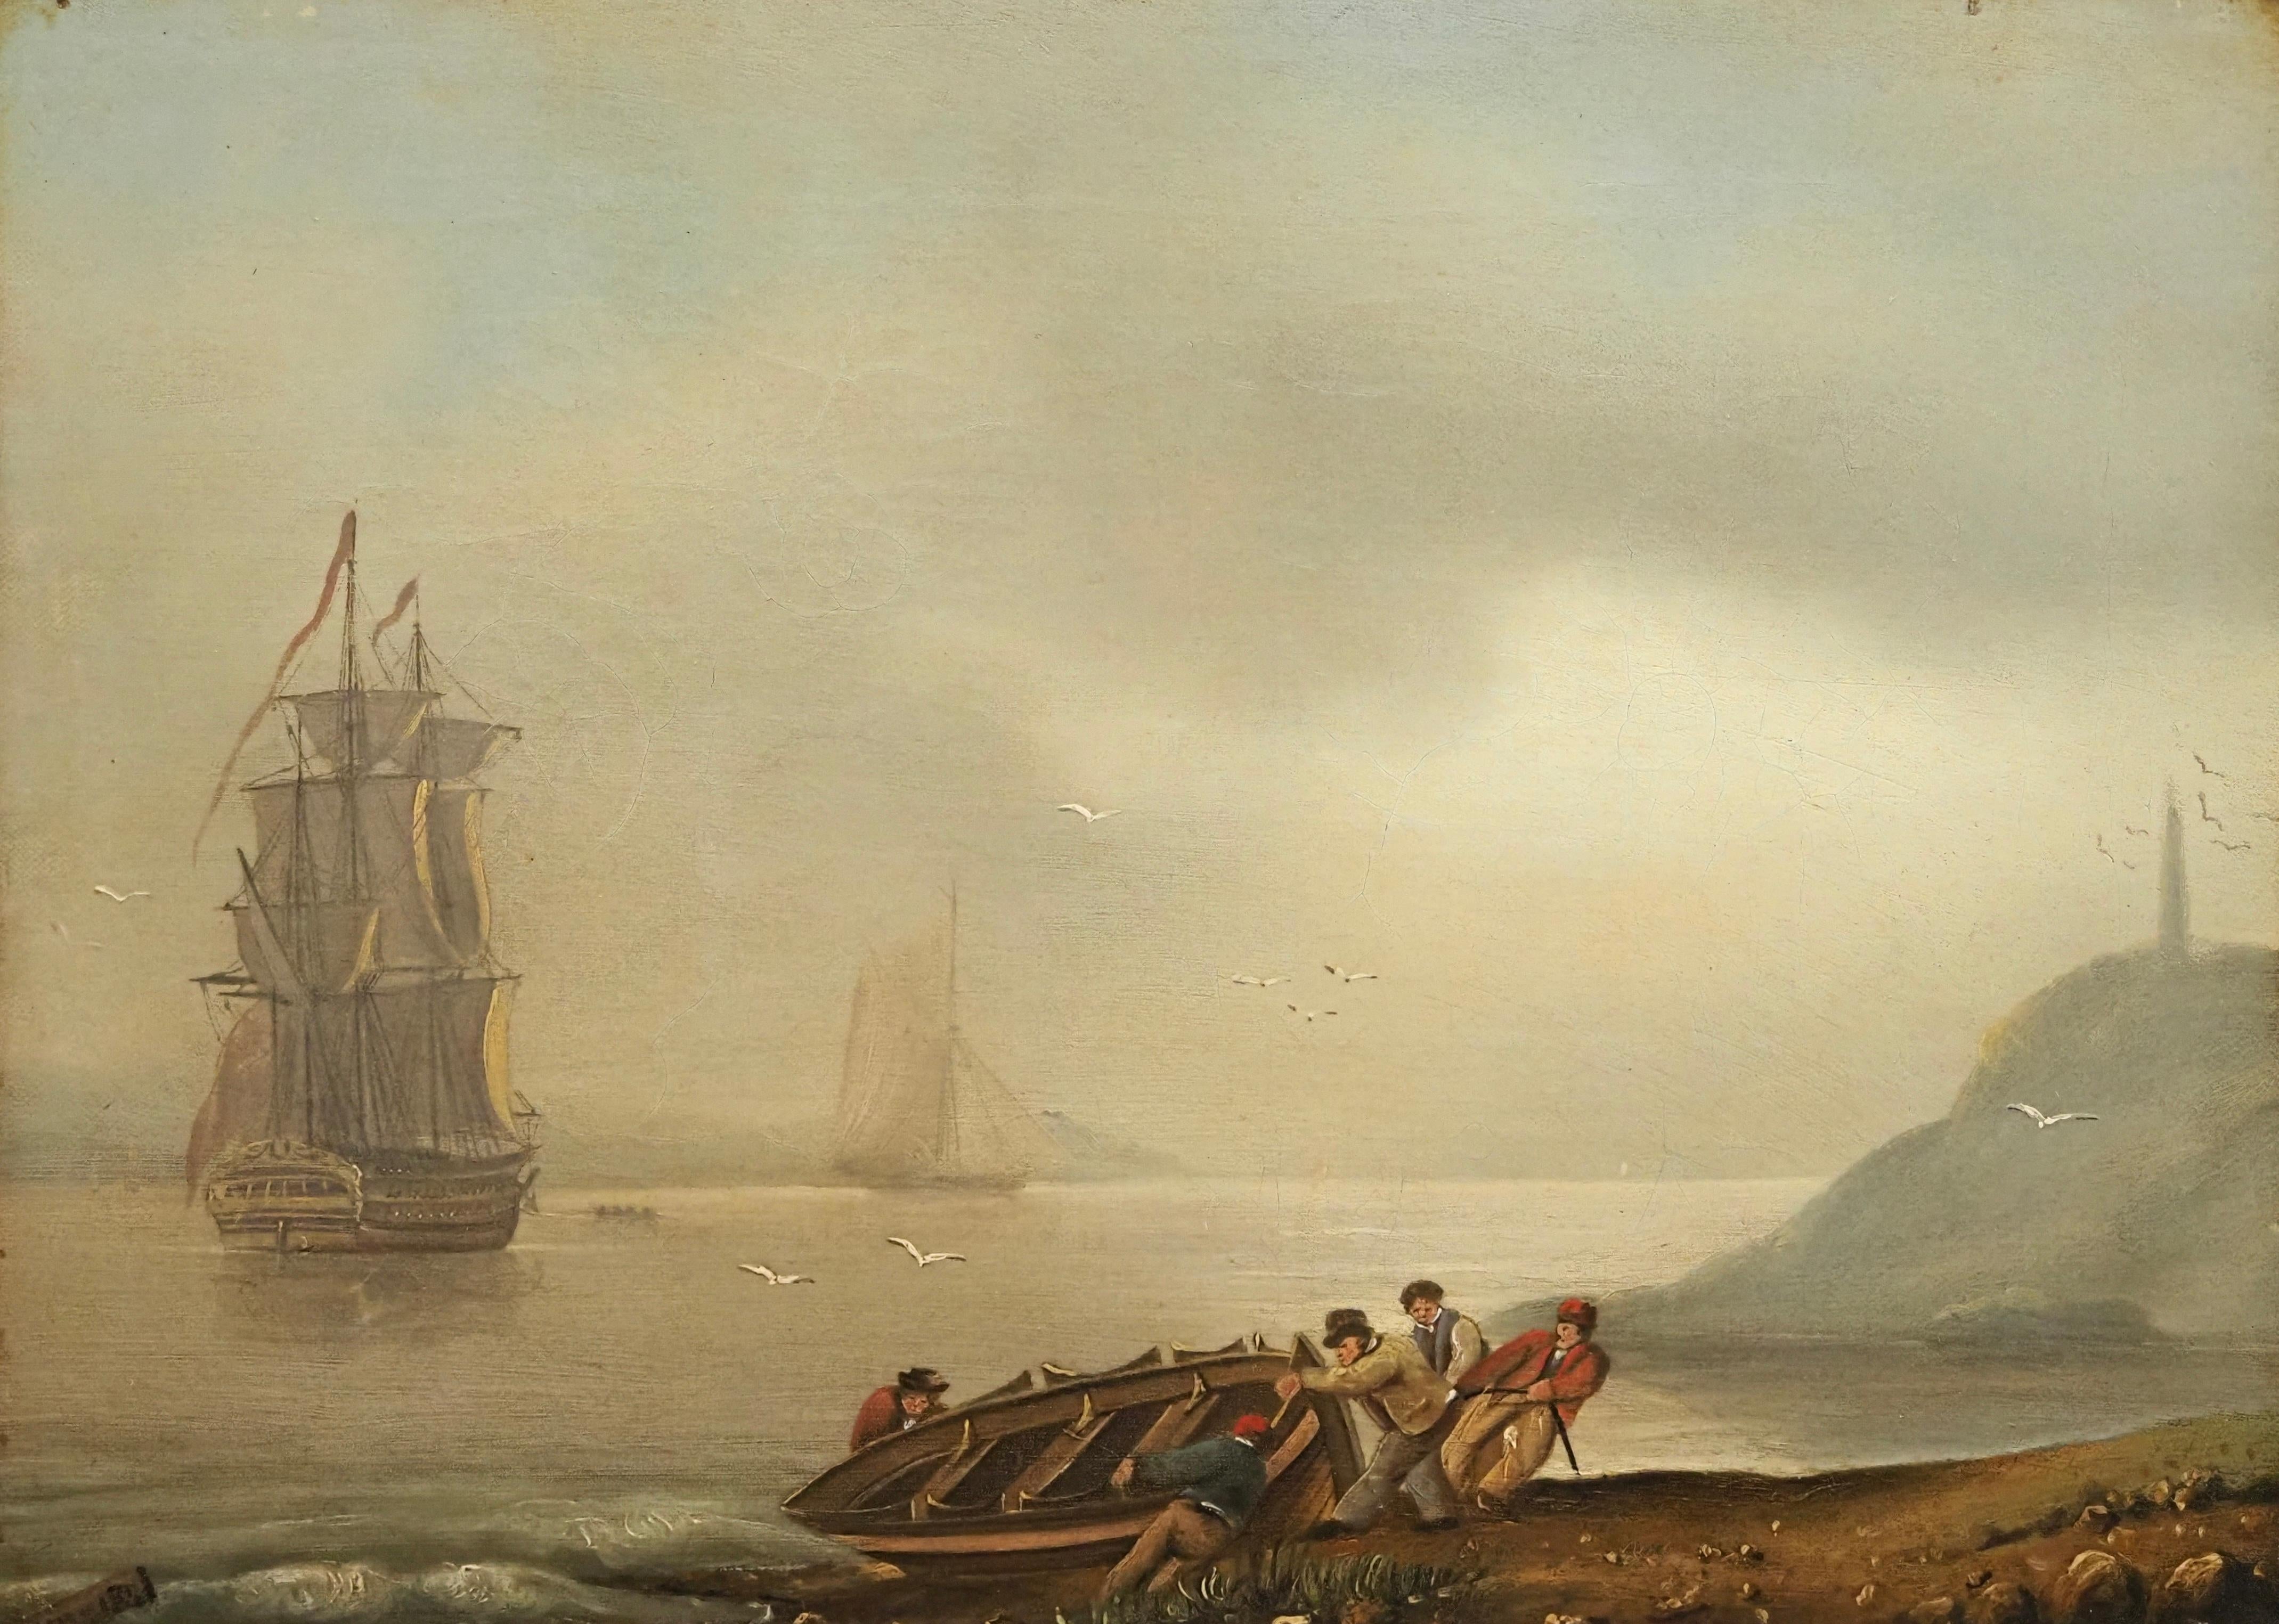 Hauling in a boat - Painting by Thomas Luny